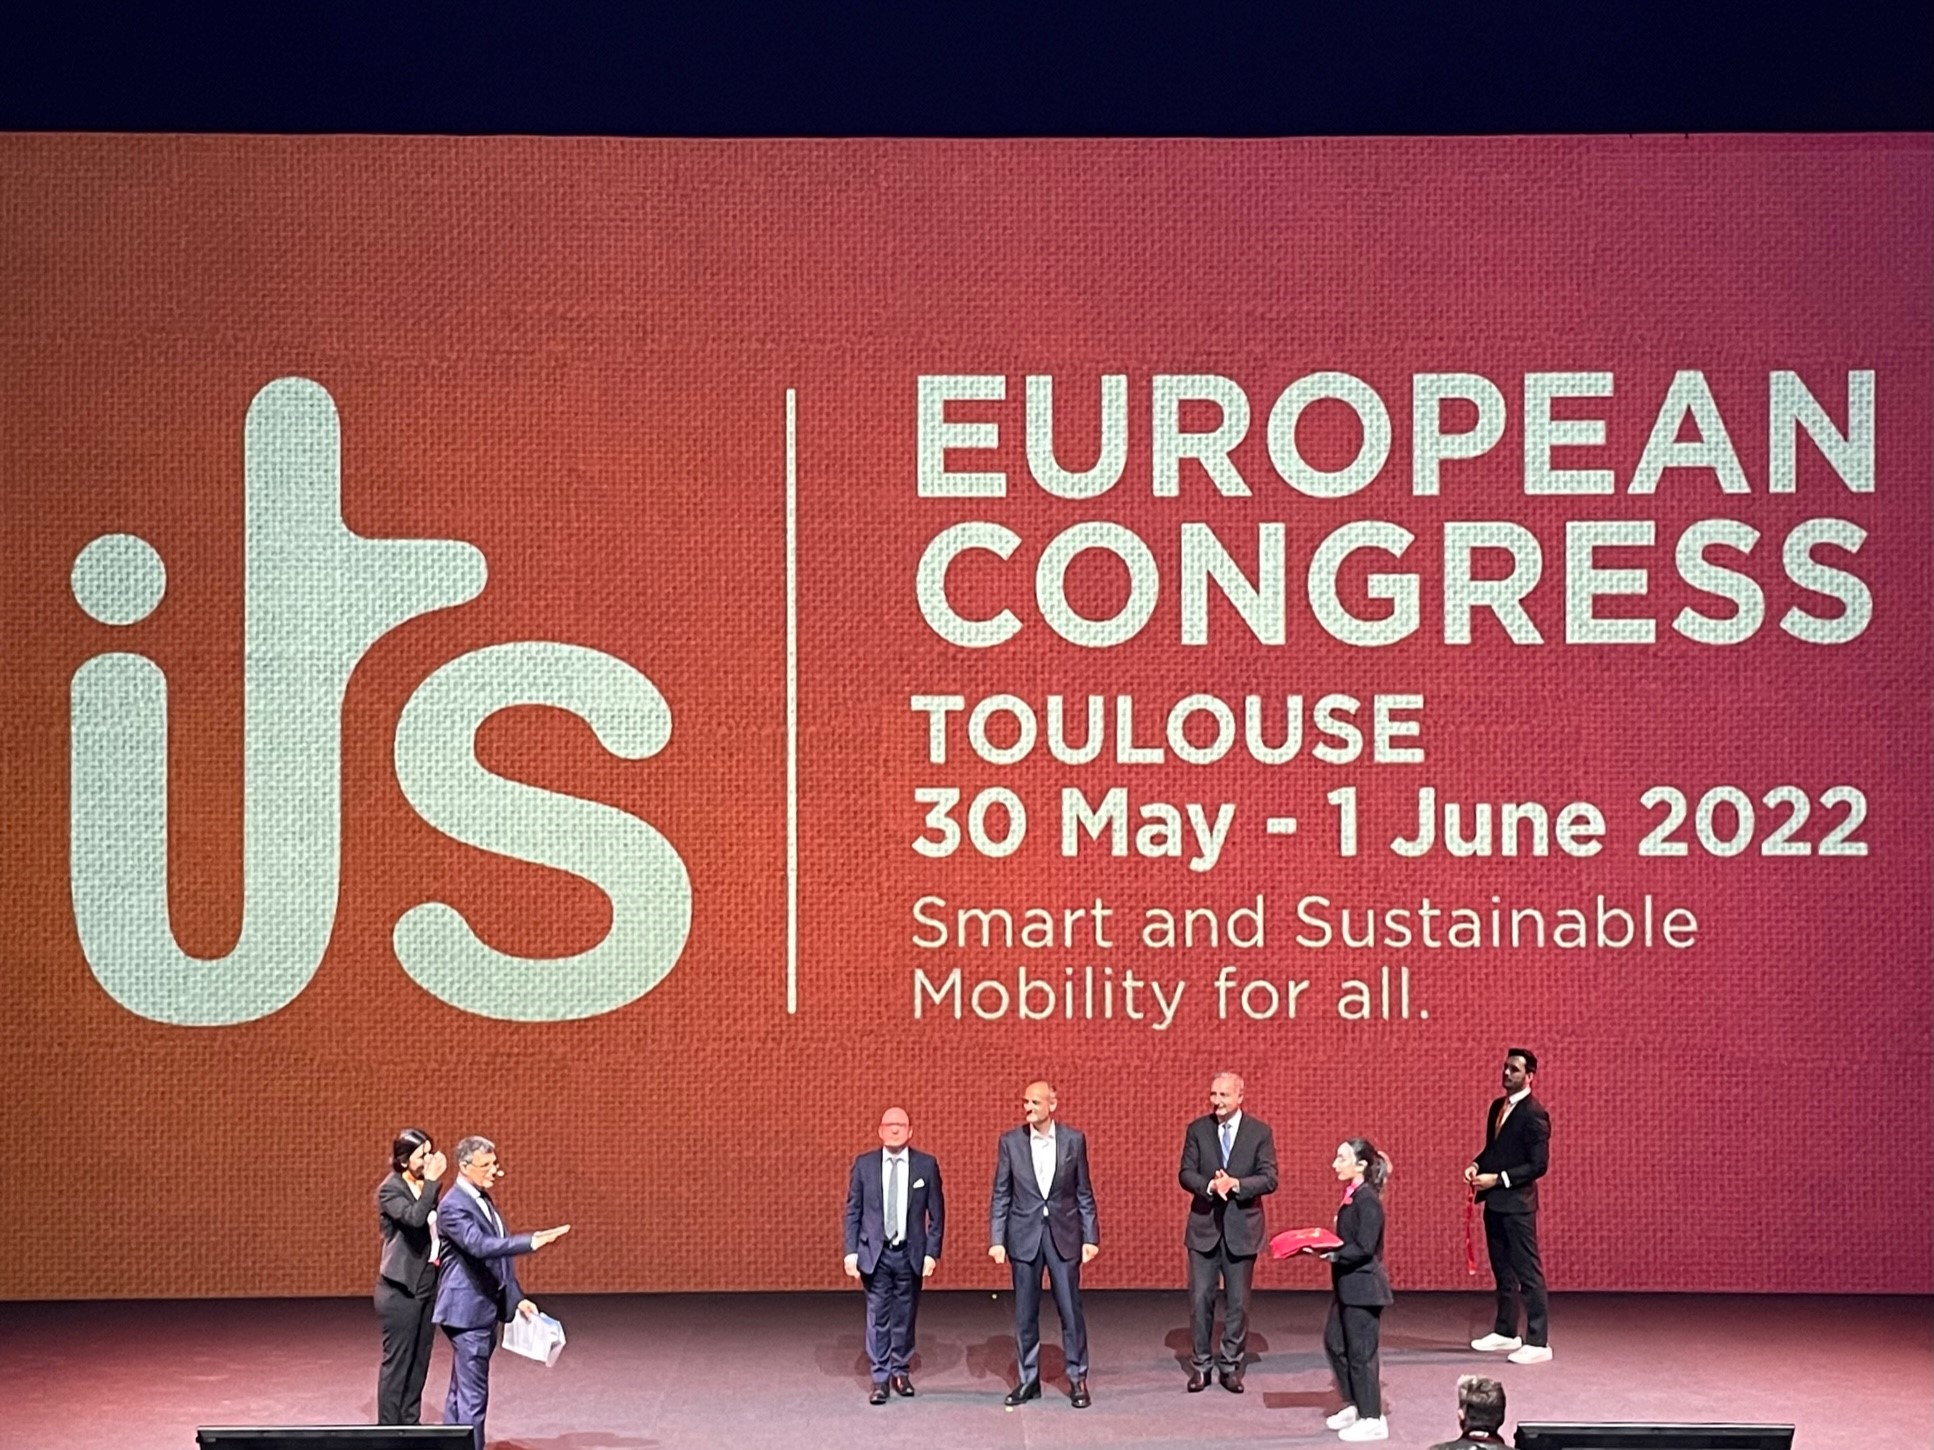 ITS European Congress Toulouse Ertico MaaS smart mobility (© ITS International)